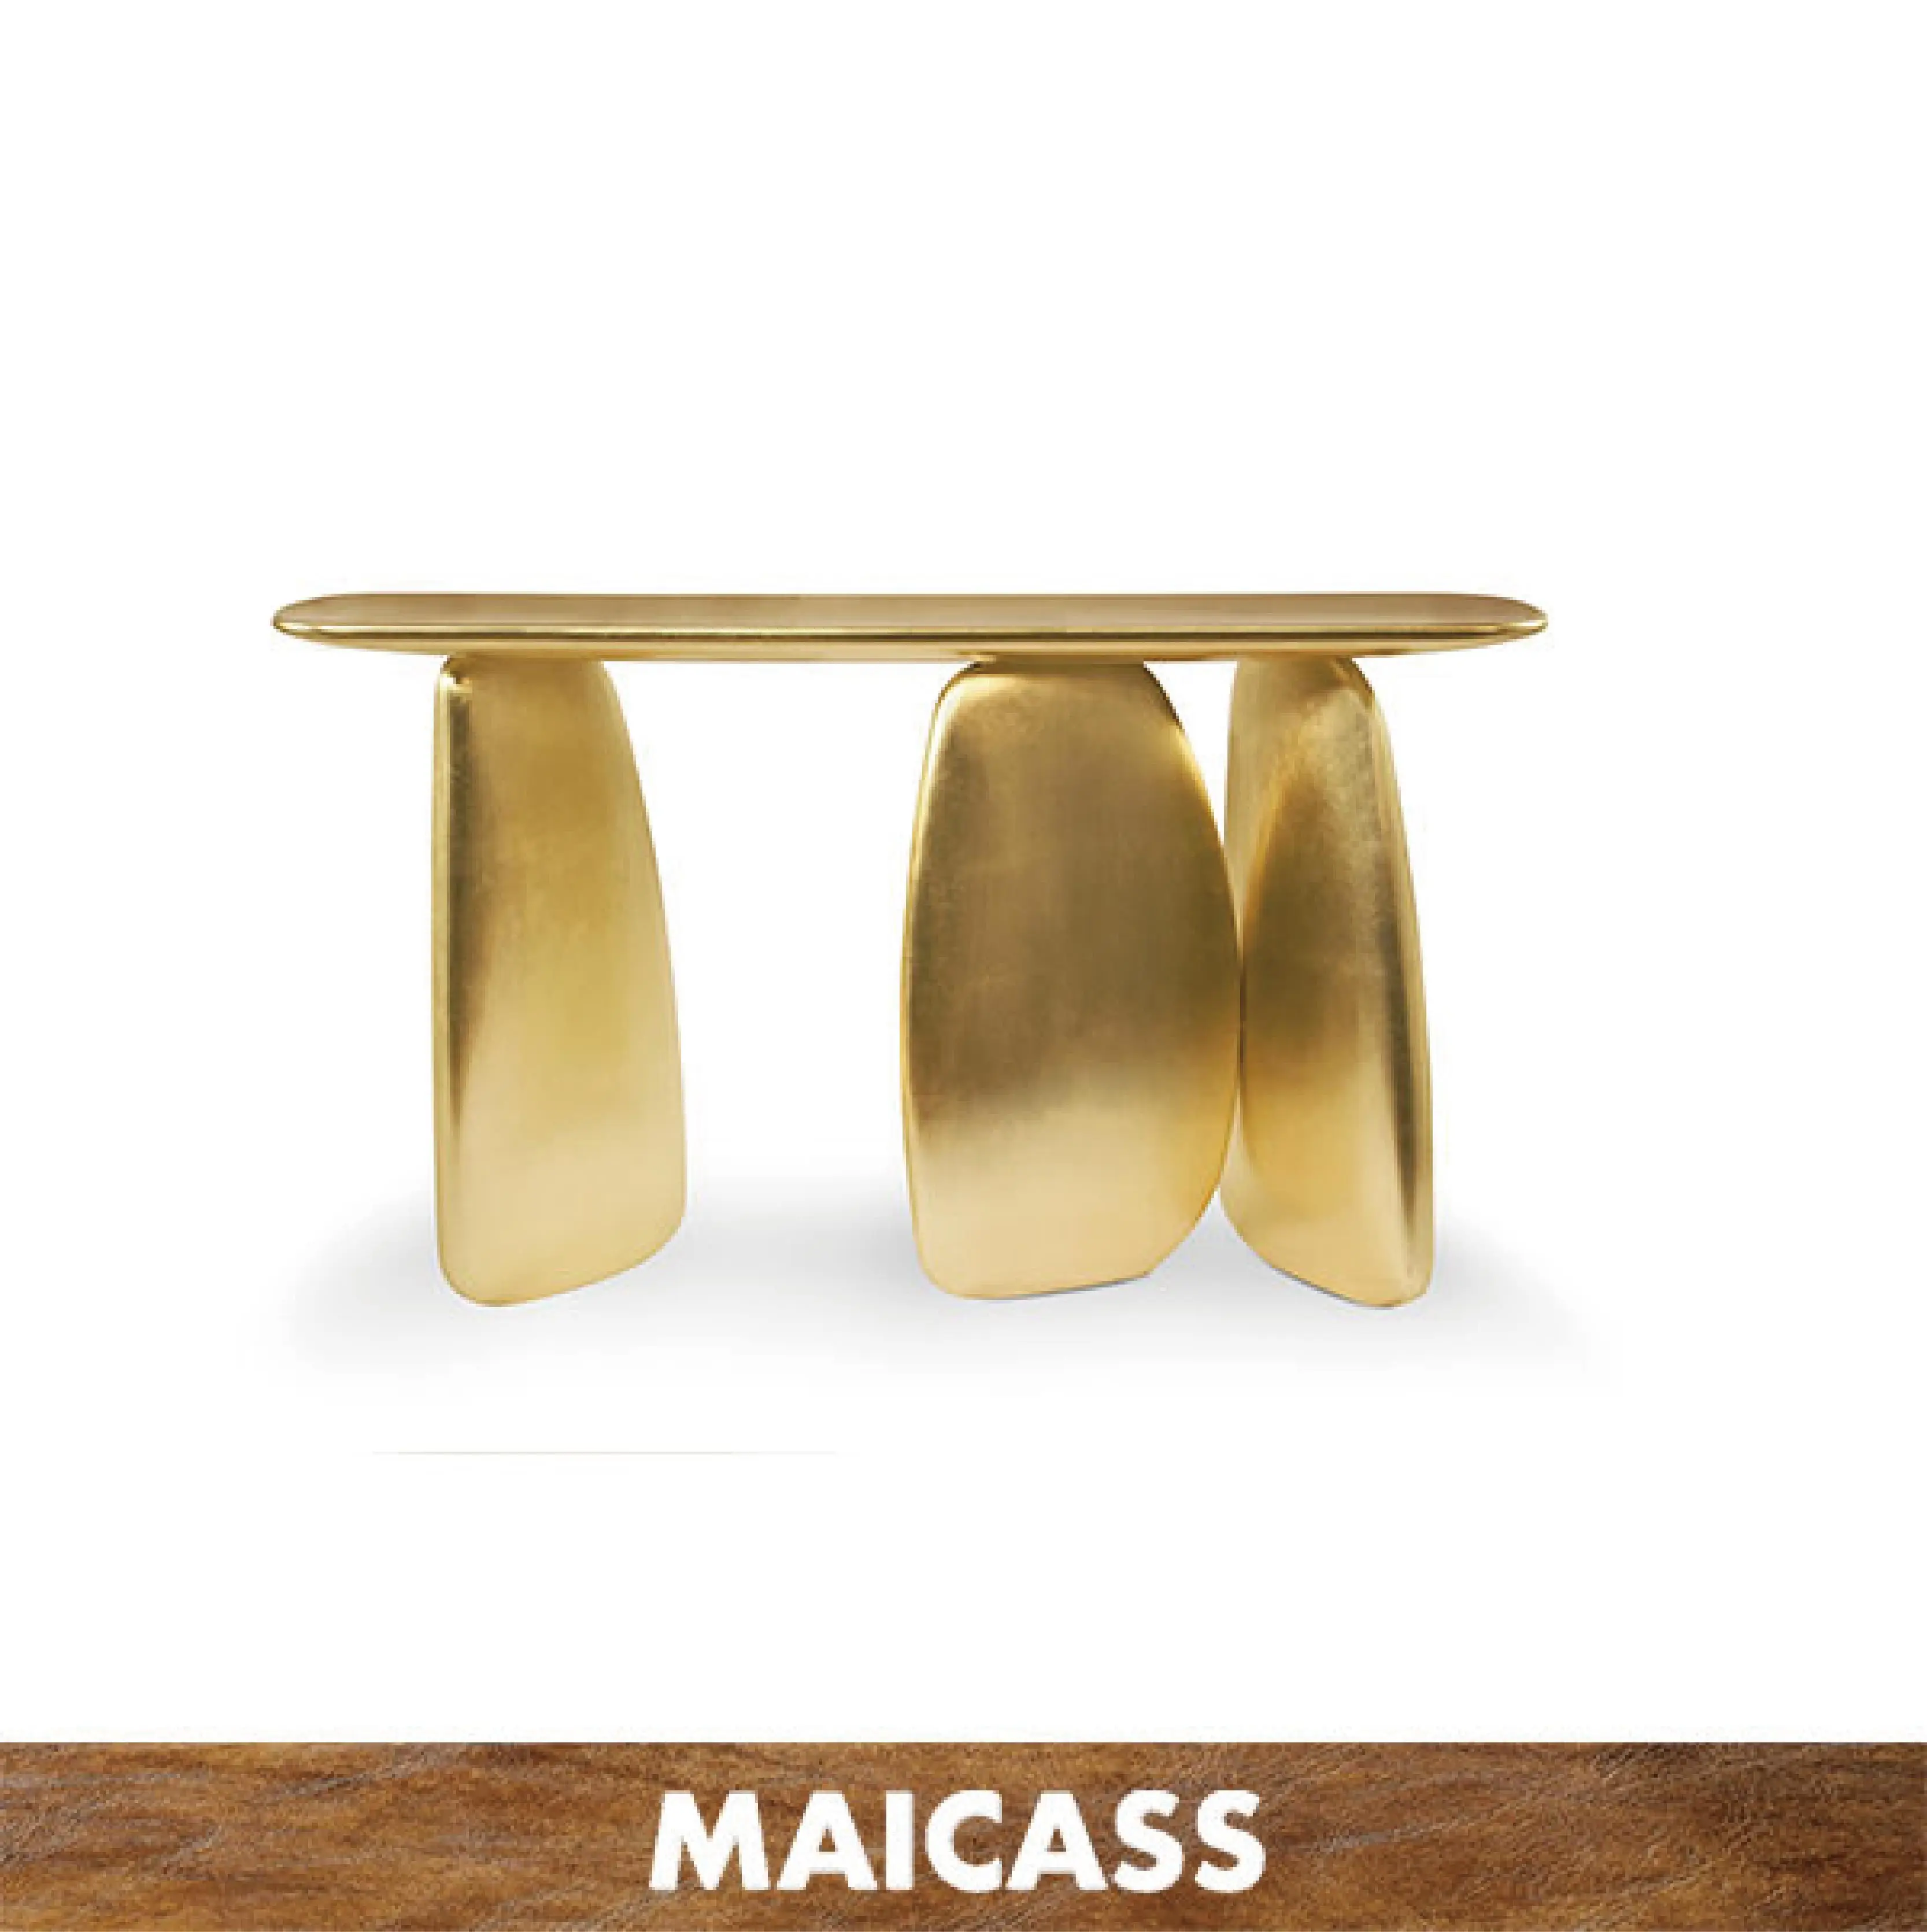 Elegant Gold Leaf Gloss Varnish Dining Table Buy Gold Leaf Dining Table Gold Stainless Table Elegant Table Indoor Product On Alibaba Com